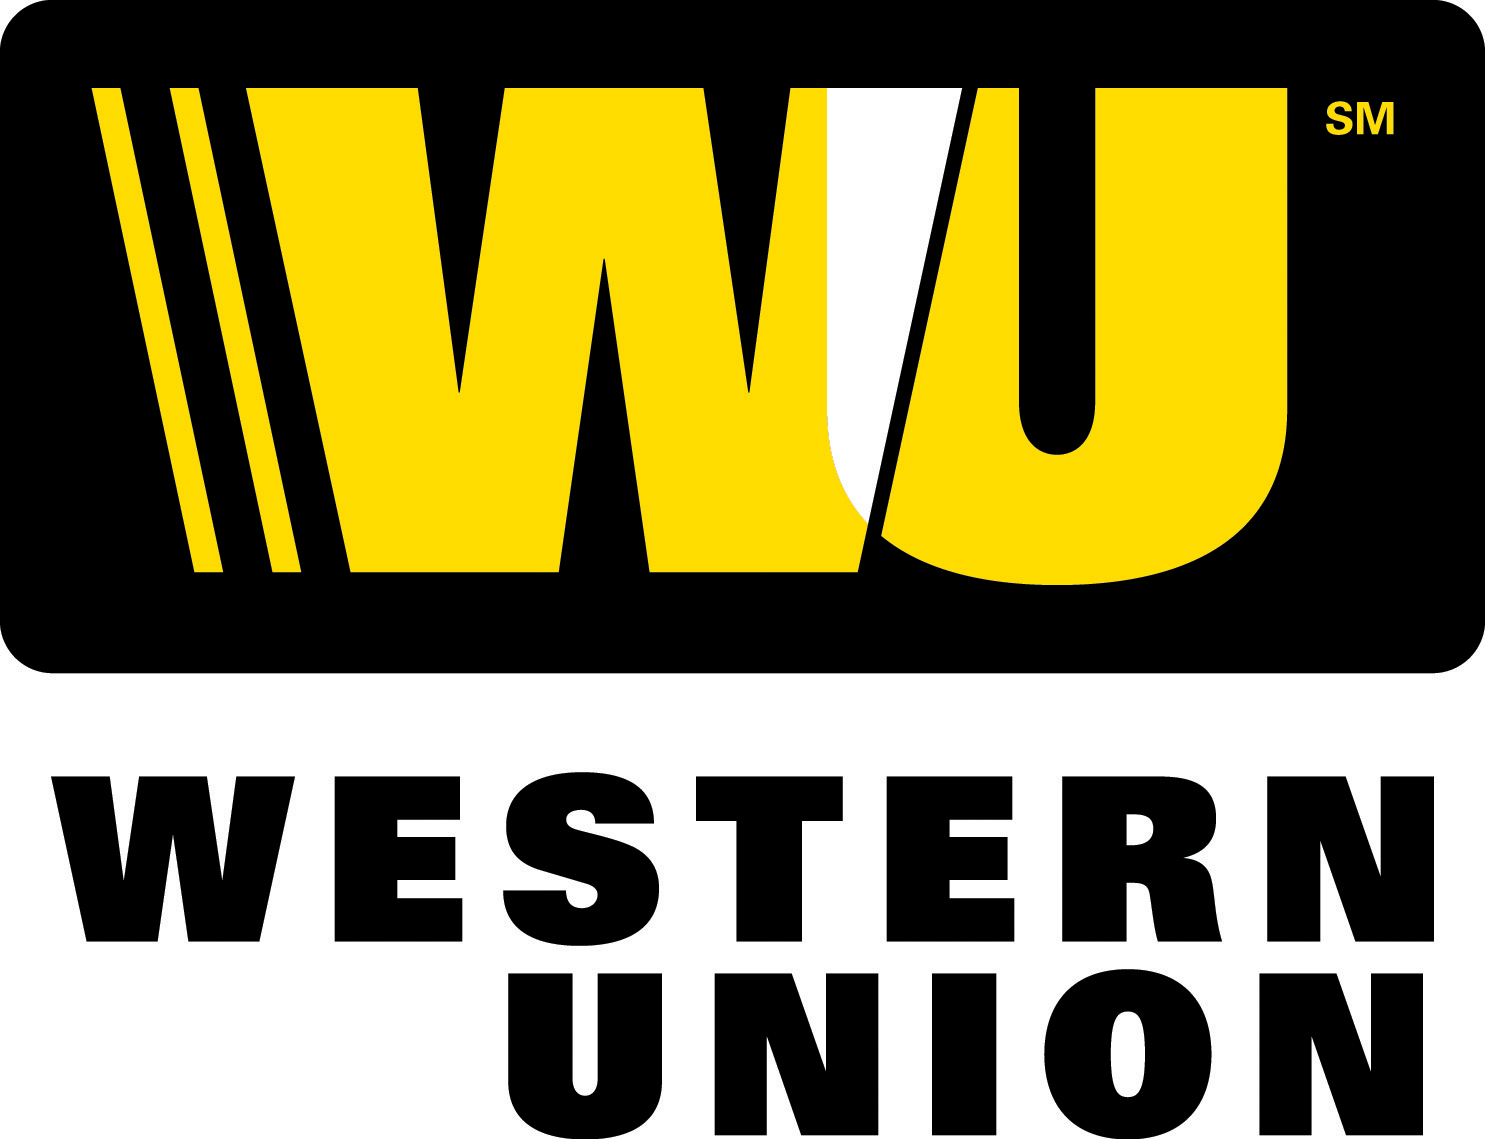 Western Union Services